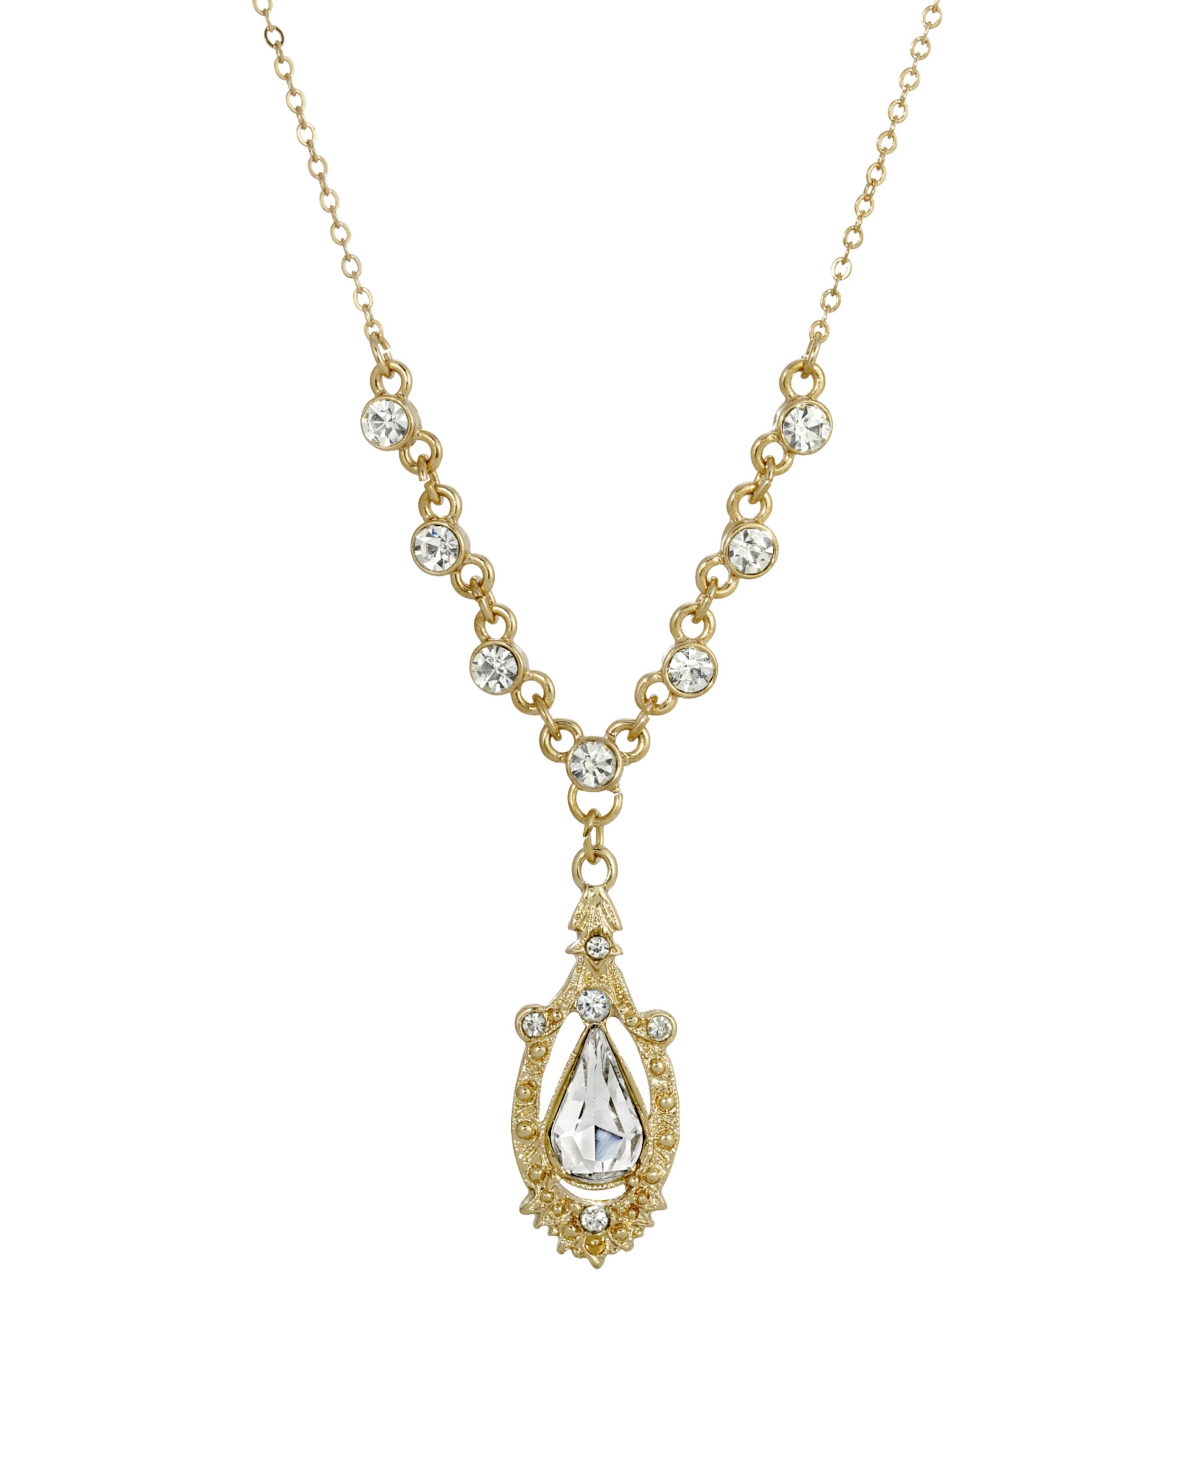 2028 Women's Gold Tone Crystal Suspended Teardrop Necklace